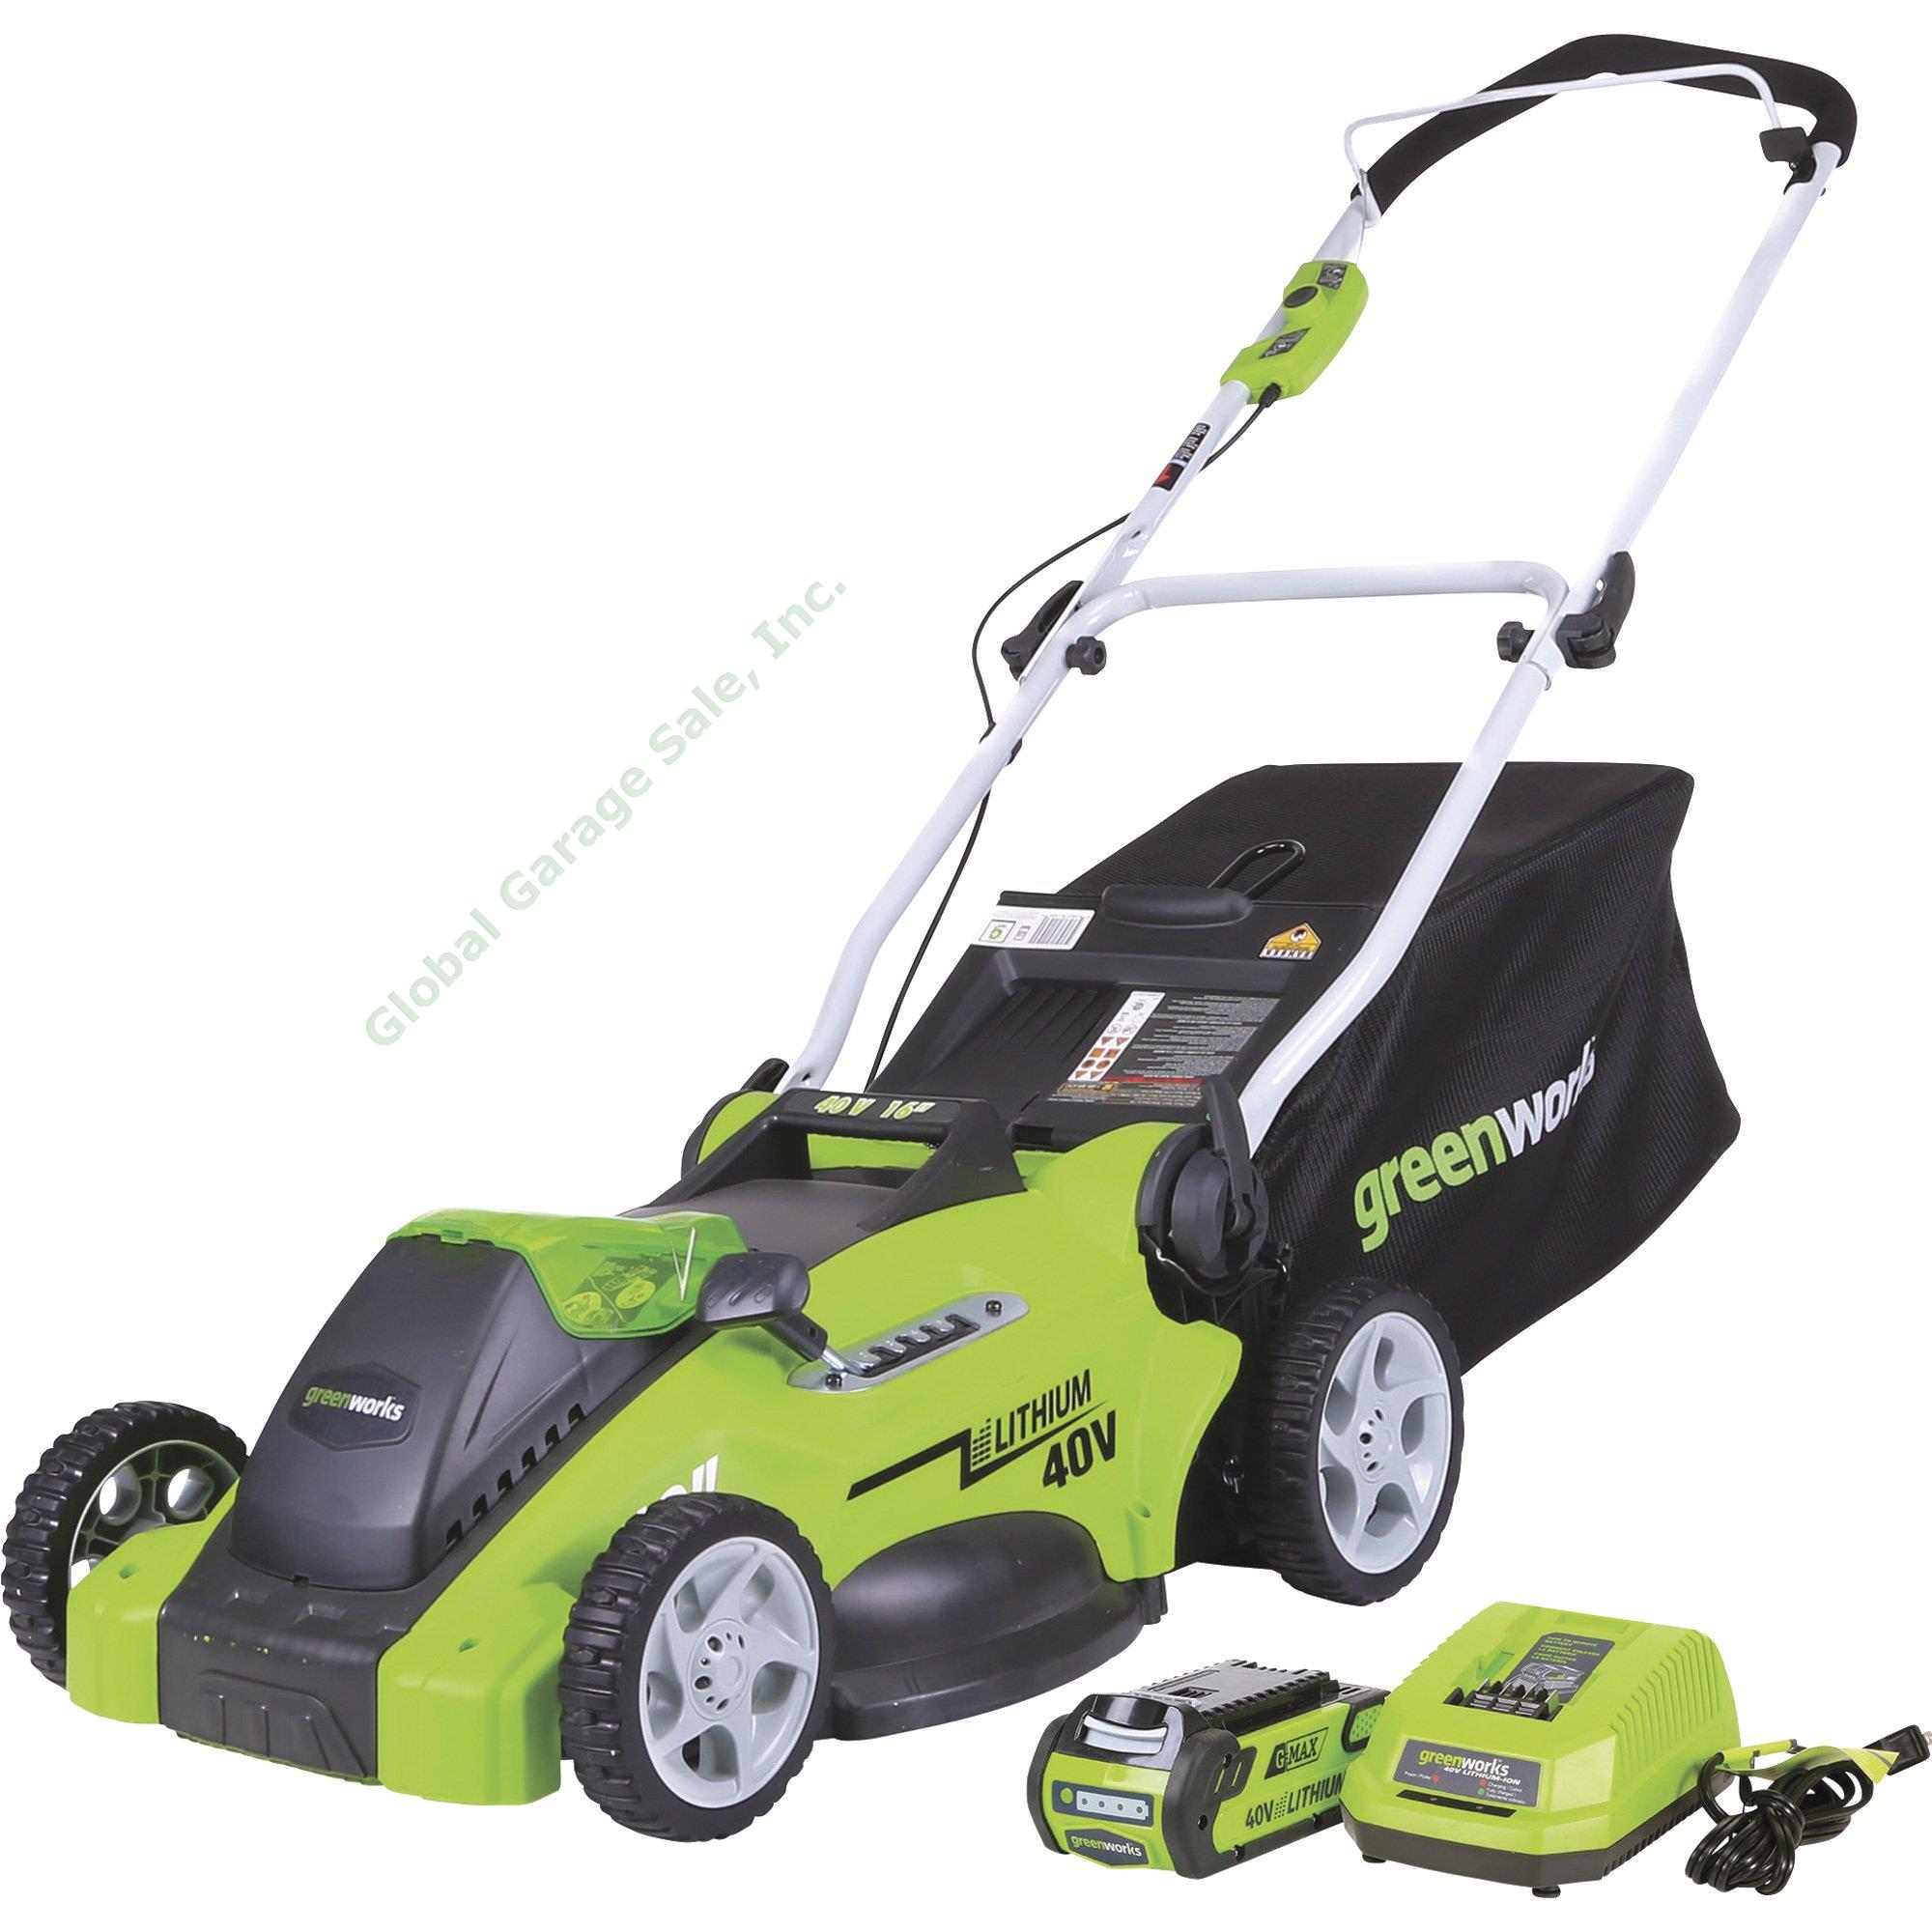 Greenworks 19" 40 Volt Lawnmower 25223 Trimmer Blower Combo Package Deal